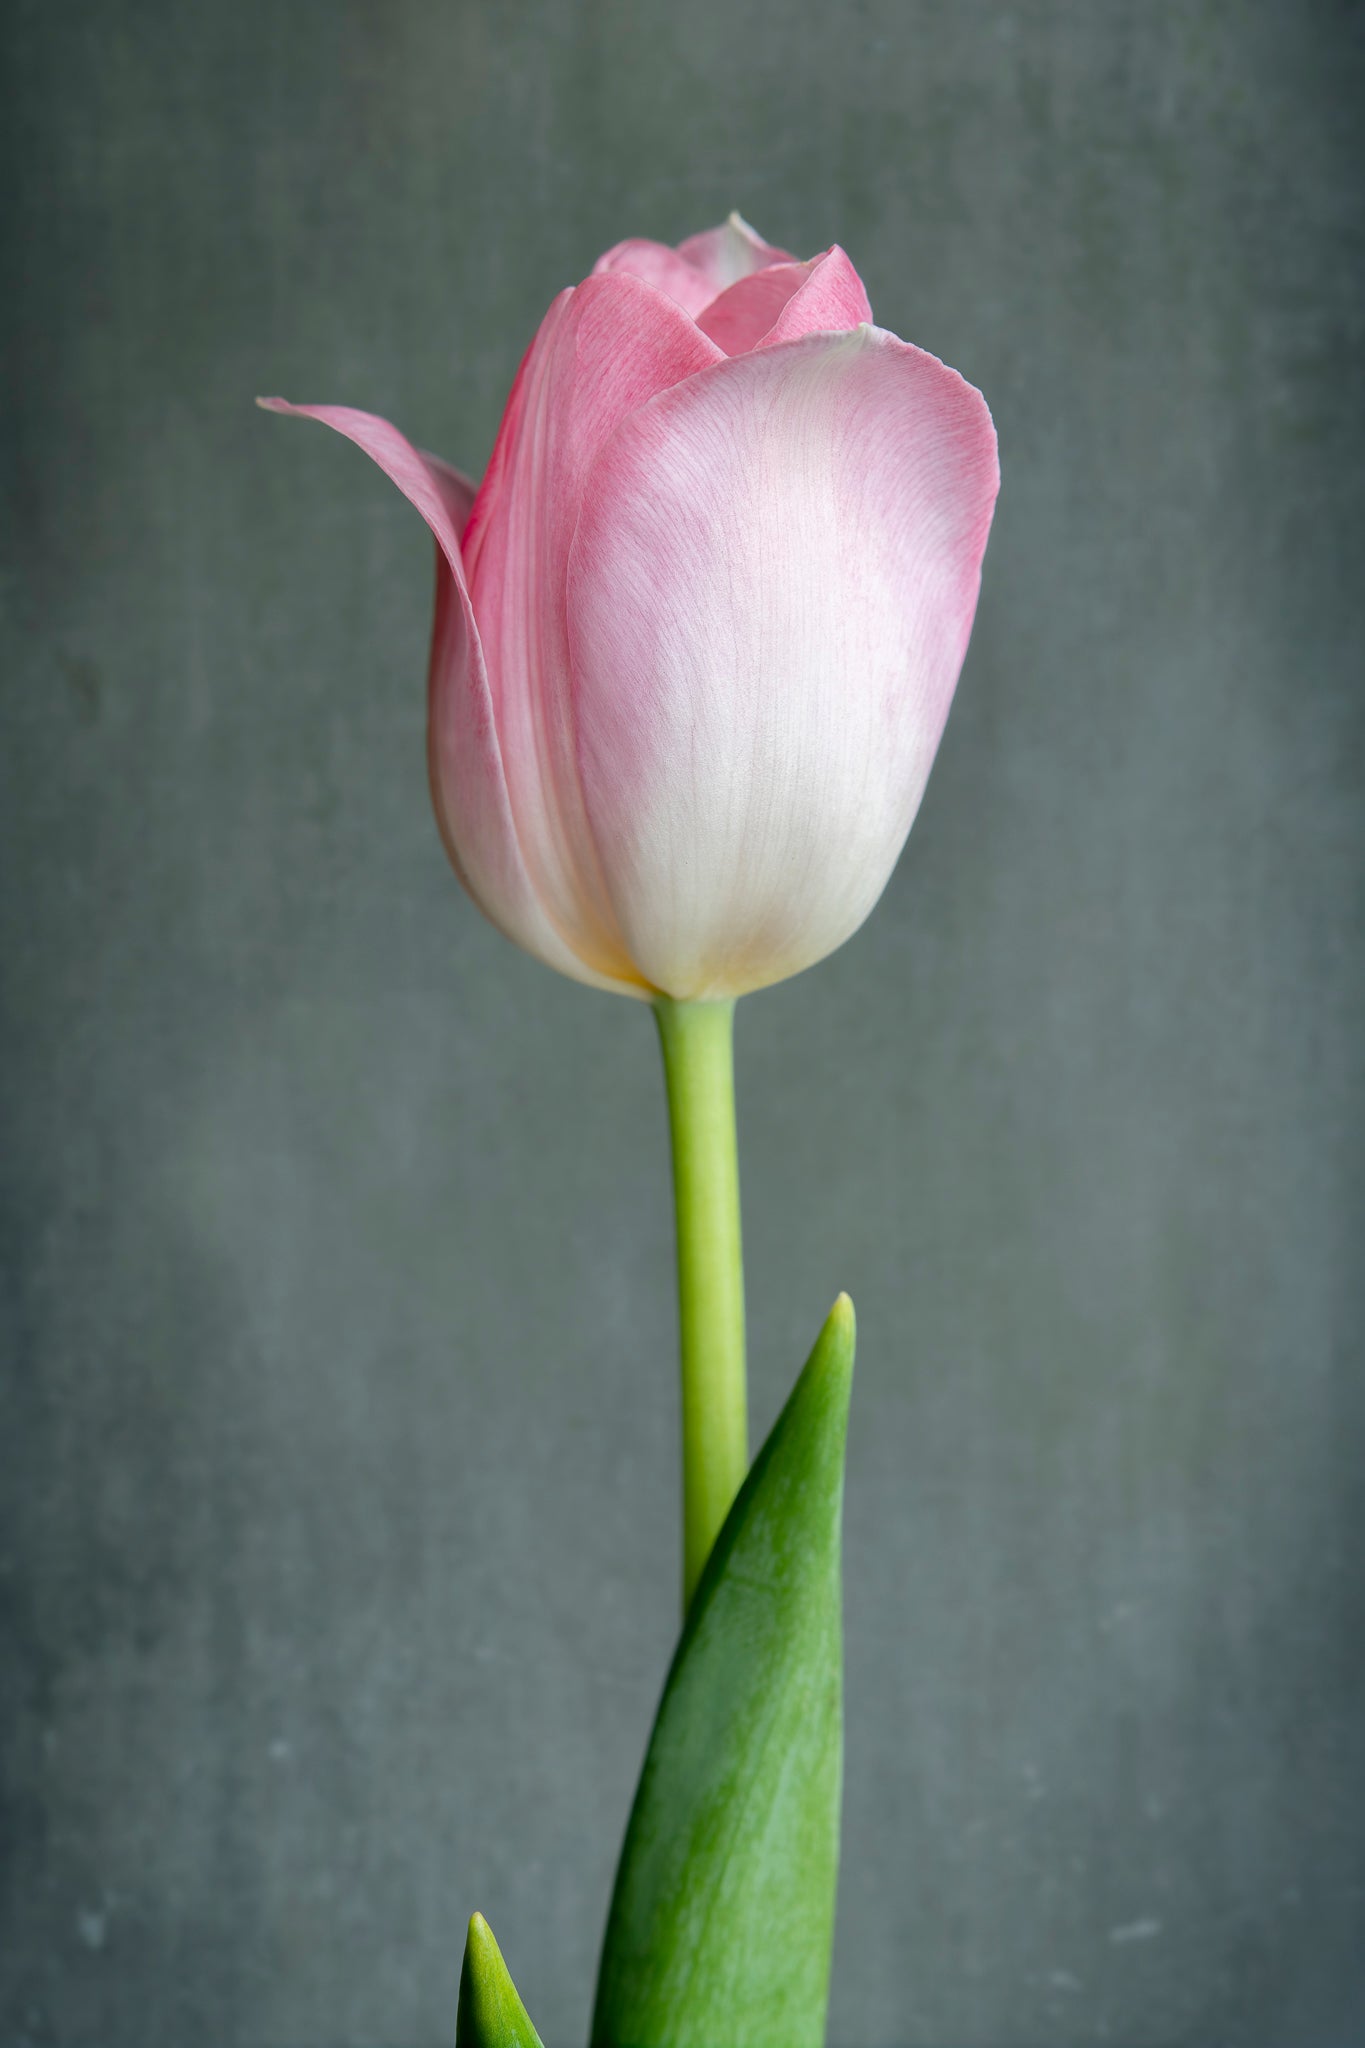 Fine Art Photograph of a singular pink tulip flower on a grey background by Cameron Dreaux. 